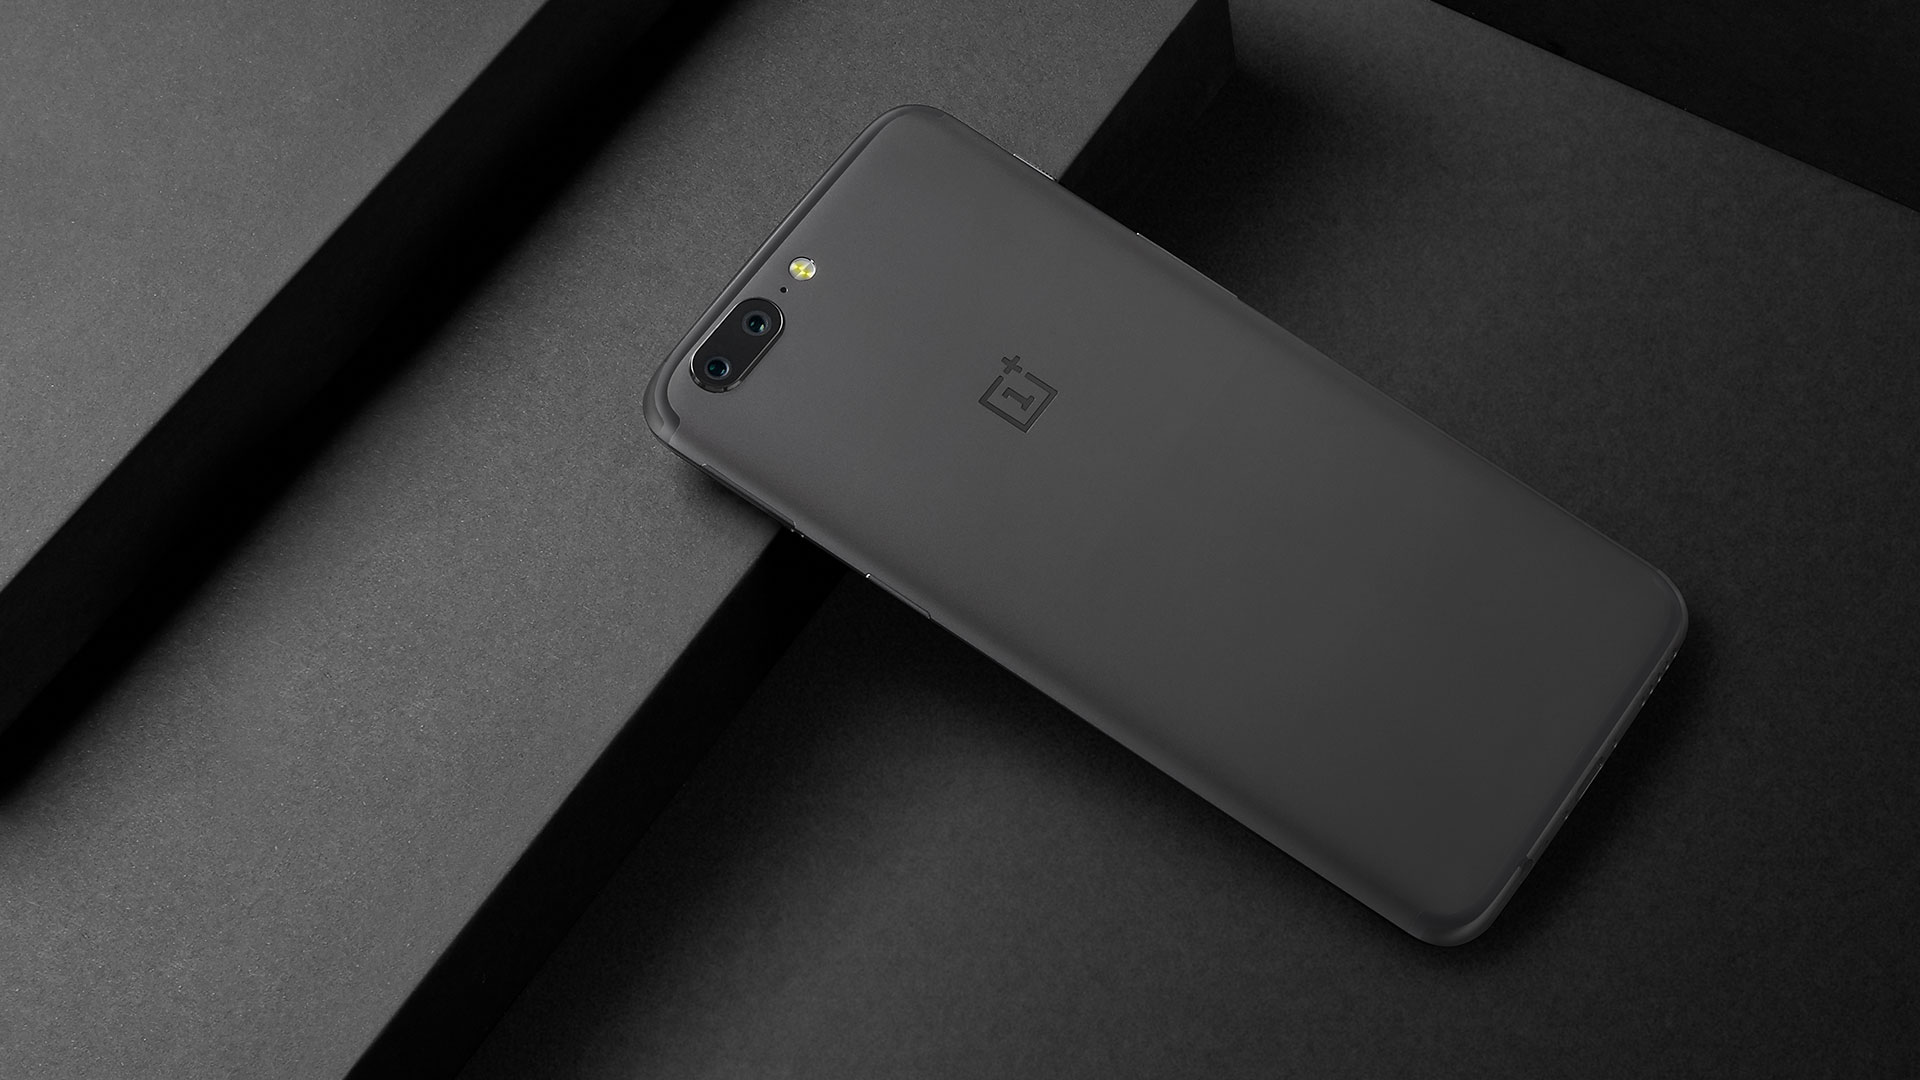 OnePlus 5 Available on 8 July, Pre-Order Now!